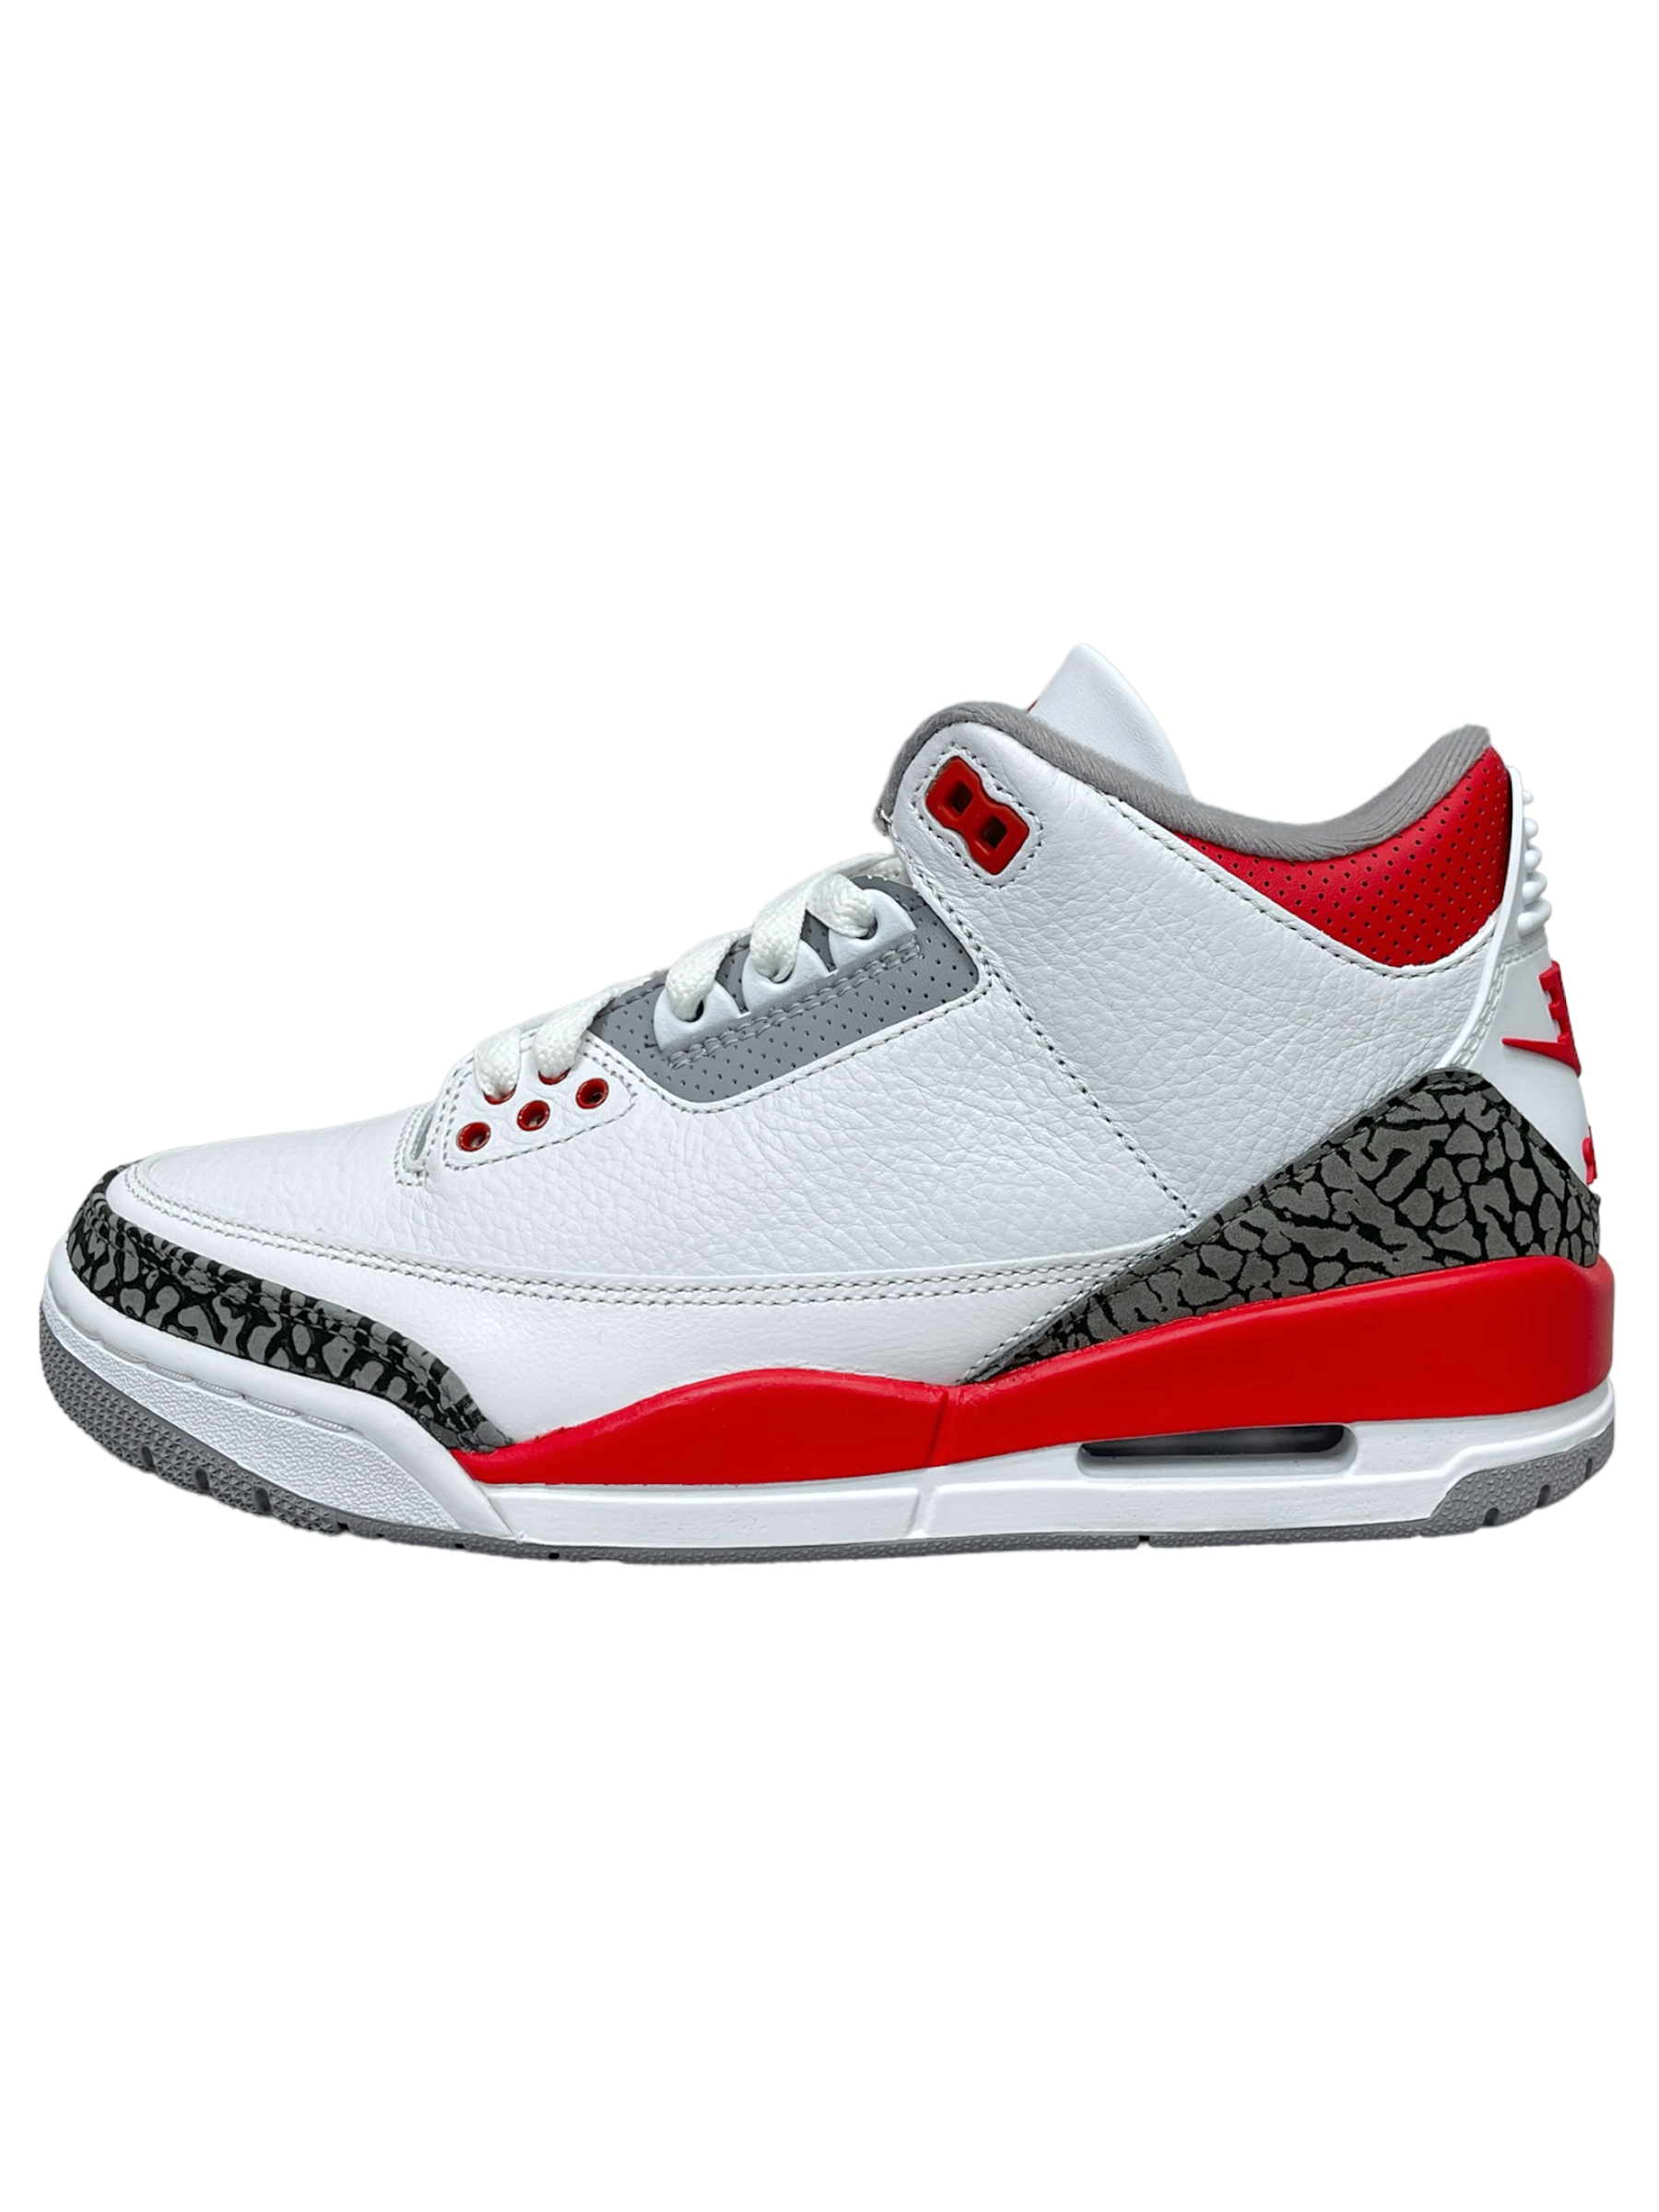 Jordan 3 Retro Fire Red - Genuine Design Luxury Consignment for Men. New & Pre-Owned Clothing, Shoes, & Accessories. Calgary, Canada